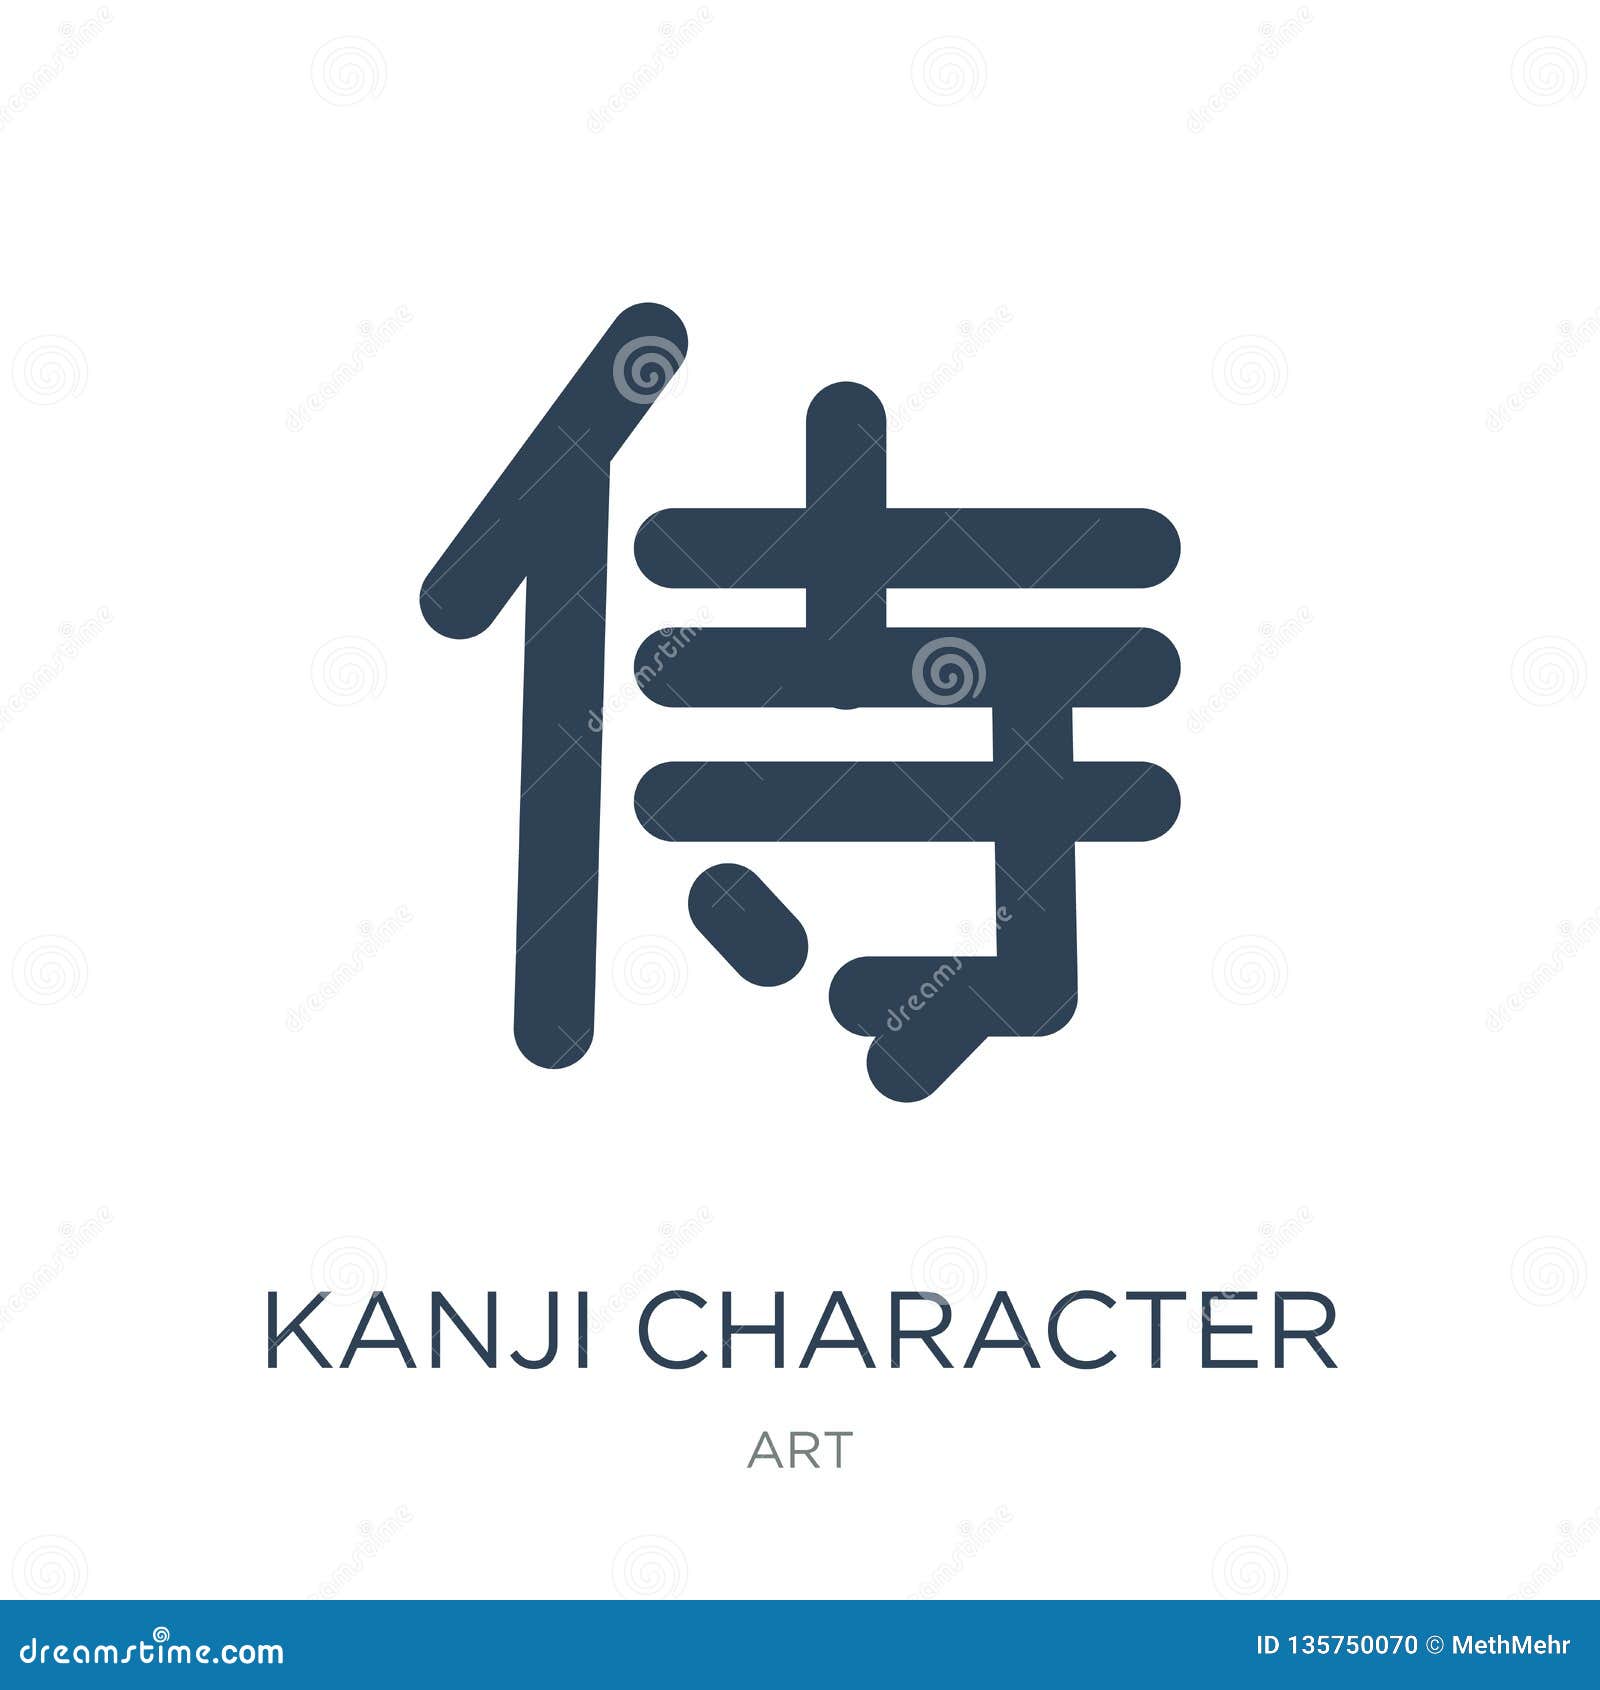 Kanji Character Icon In Trendy Design Style Kanji Character Icon Isolated On White Background Kanji Character Vector Icon Simple Stock Vector Illustration Of Design Gold